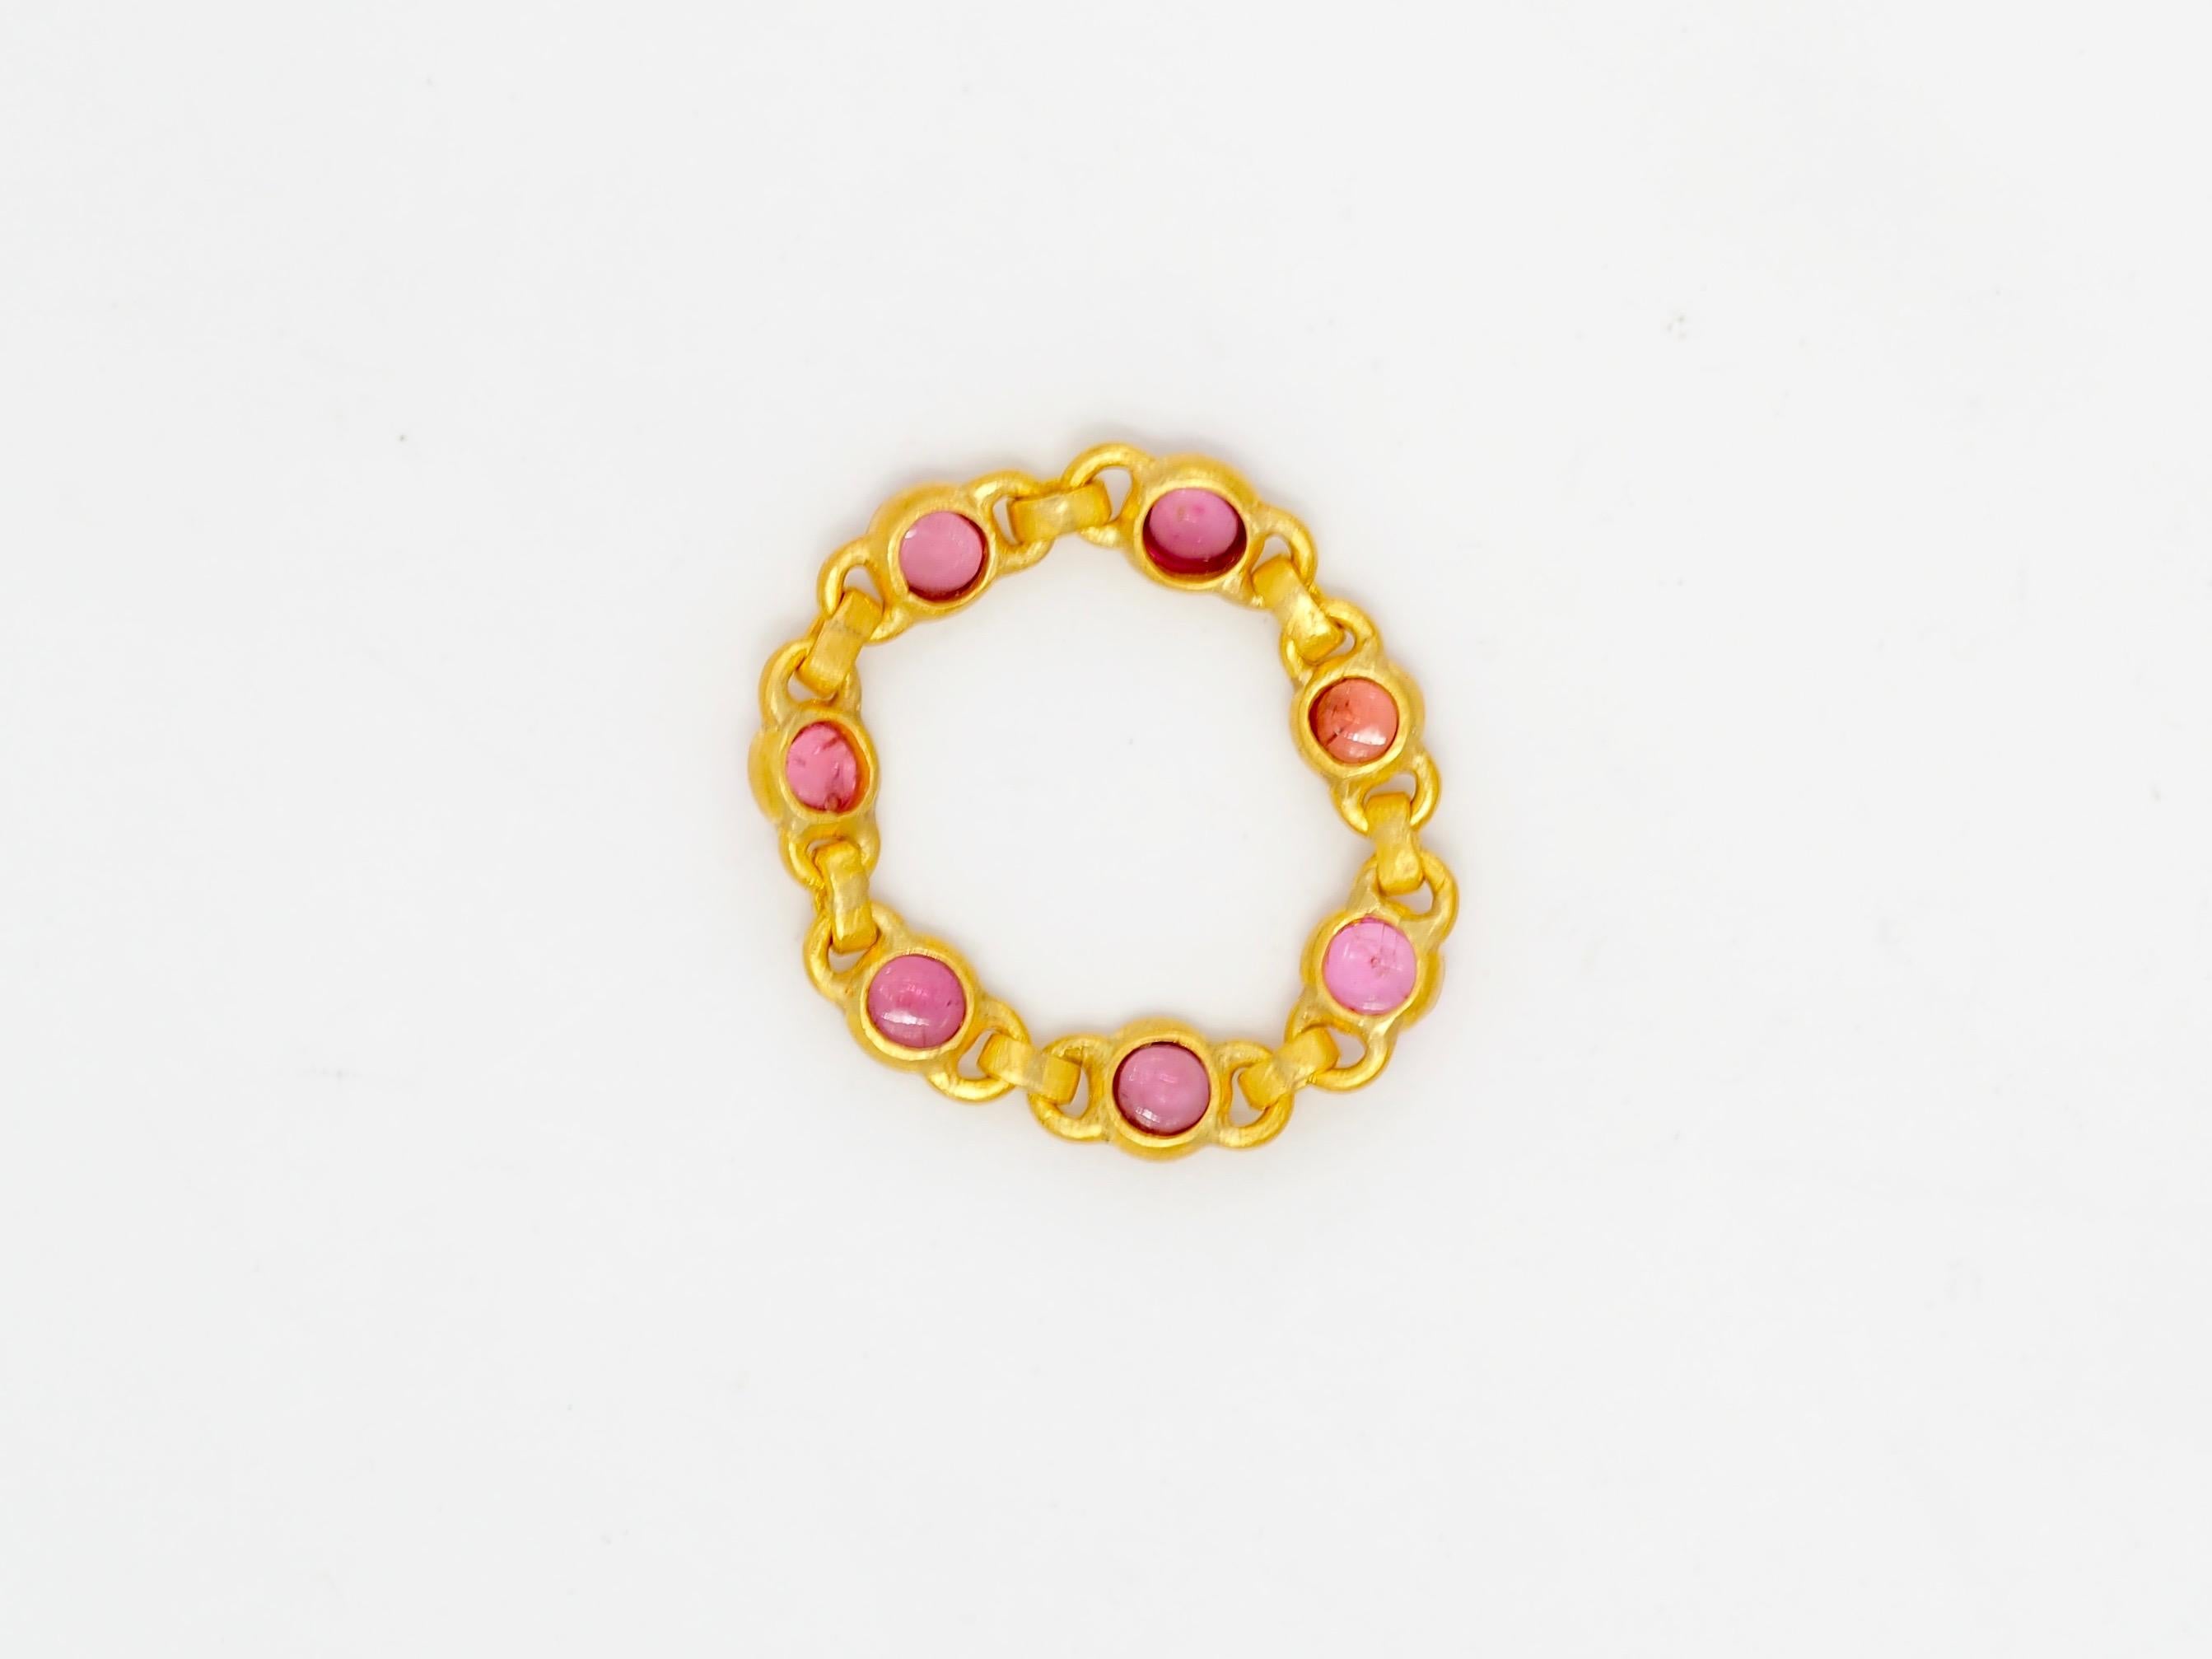 Scrives Pink Purple Spinel Cabochon 22 Karat Gold Chain Ring 2